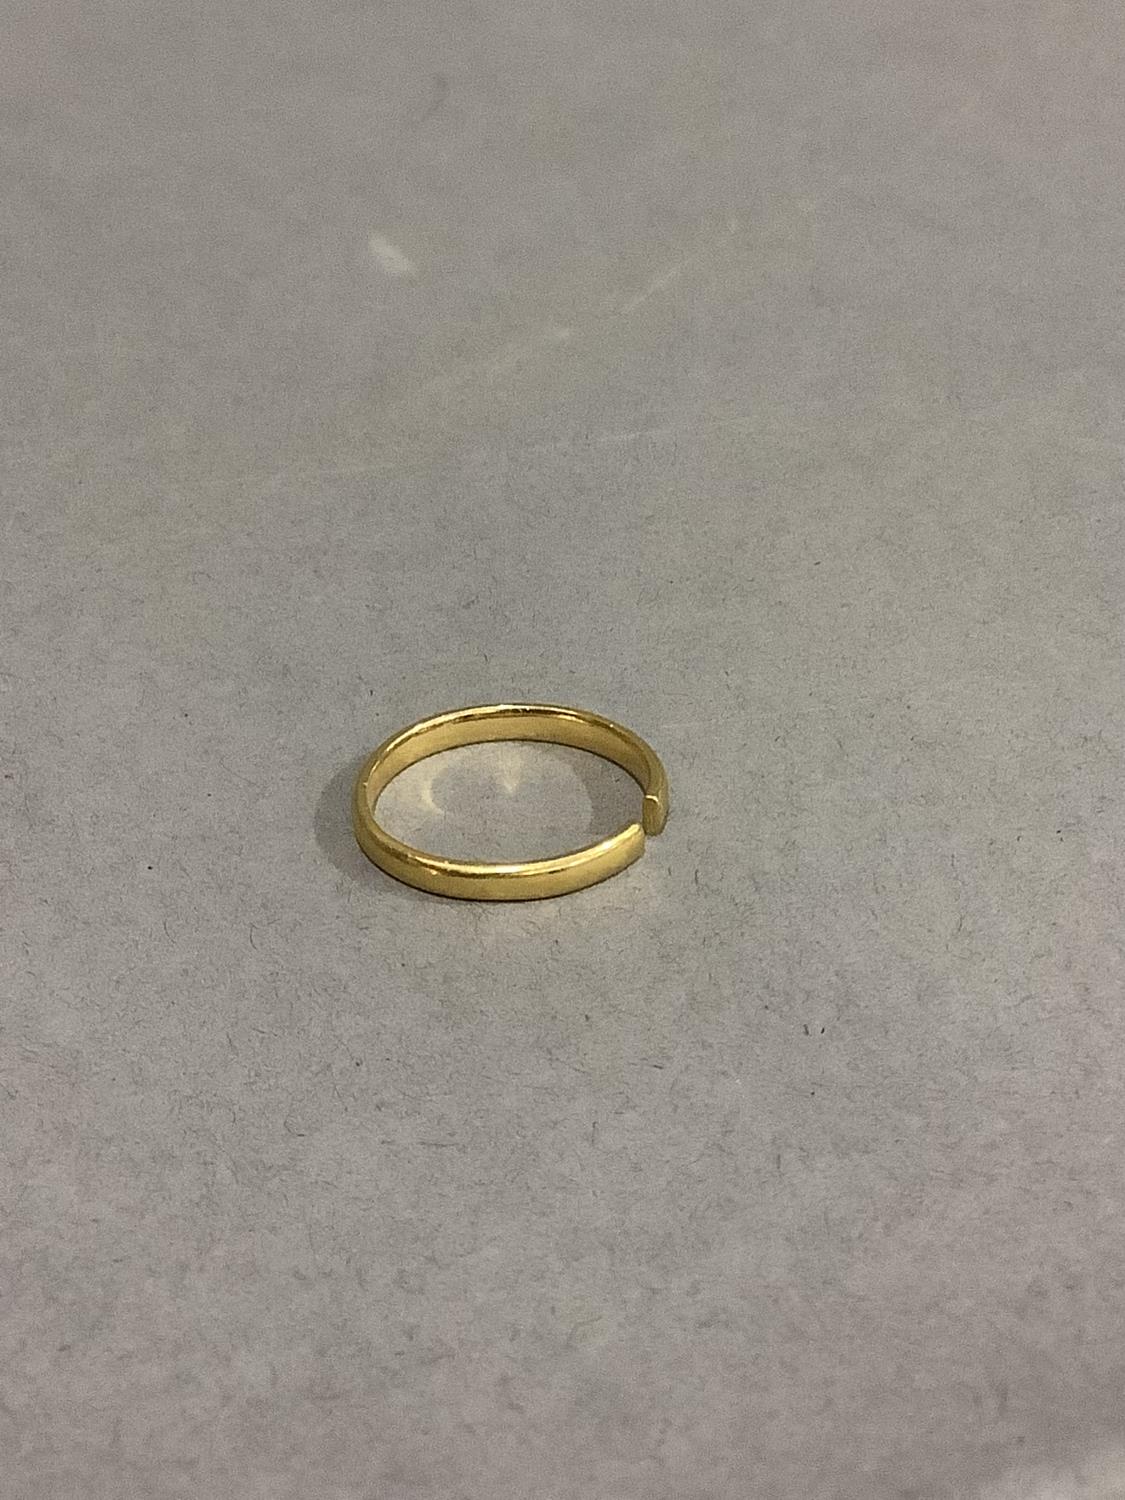 A wedding ring in 22ct A/F, approximate weight 3g - Image 2 of 2